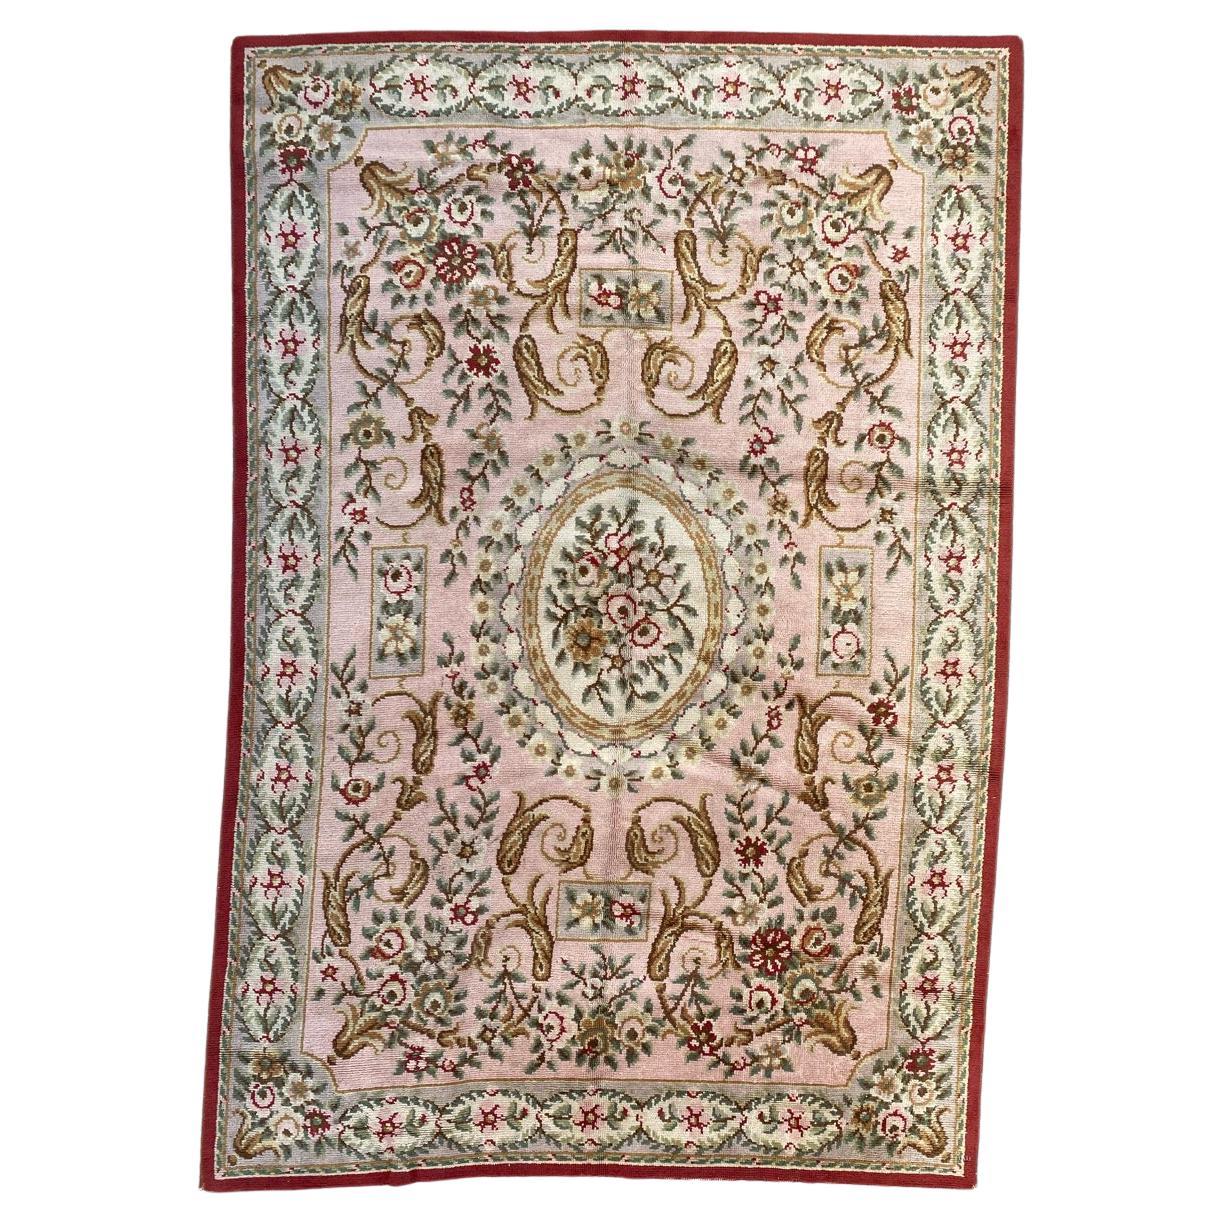 Bobyrug’s Very Beautiful Antique French Knotted Aubusson Rug